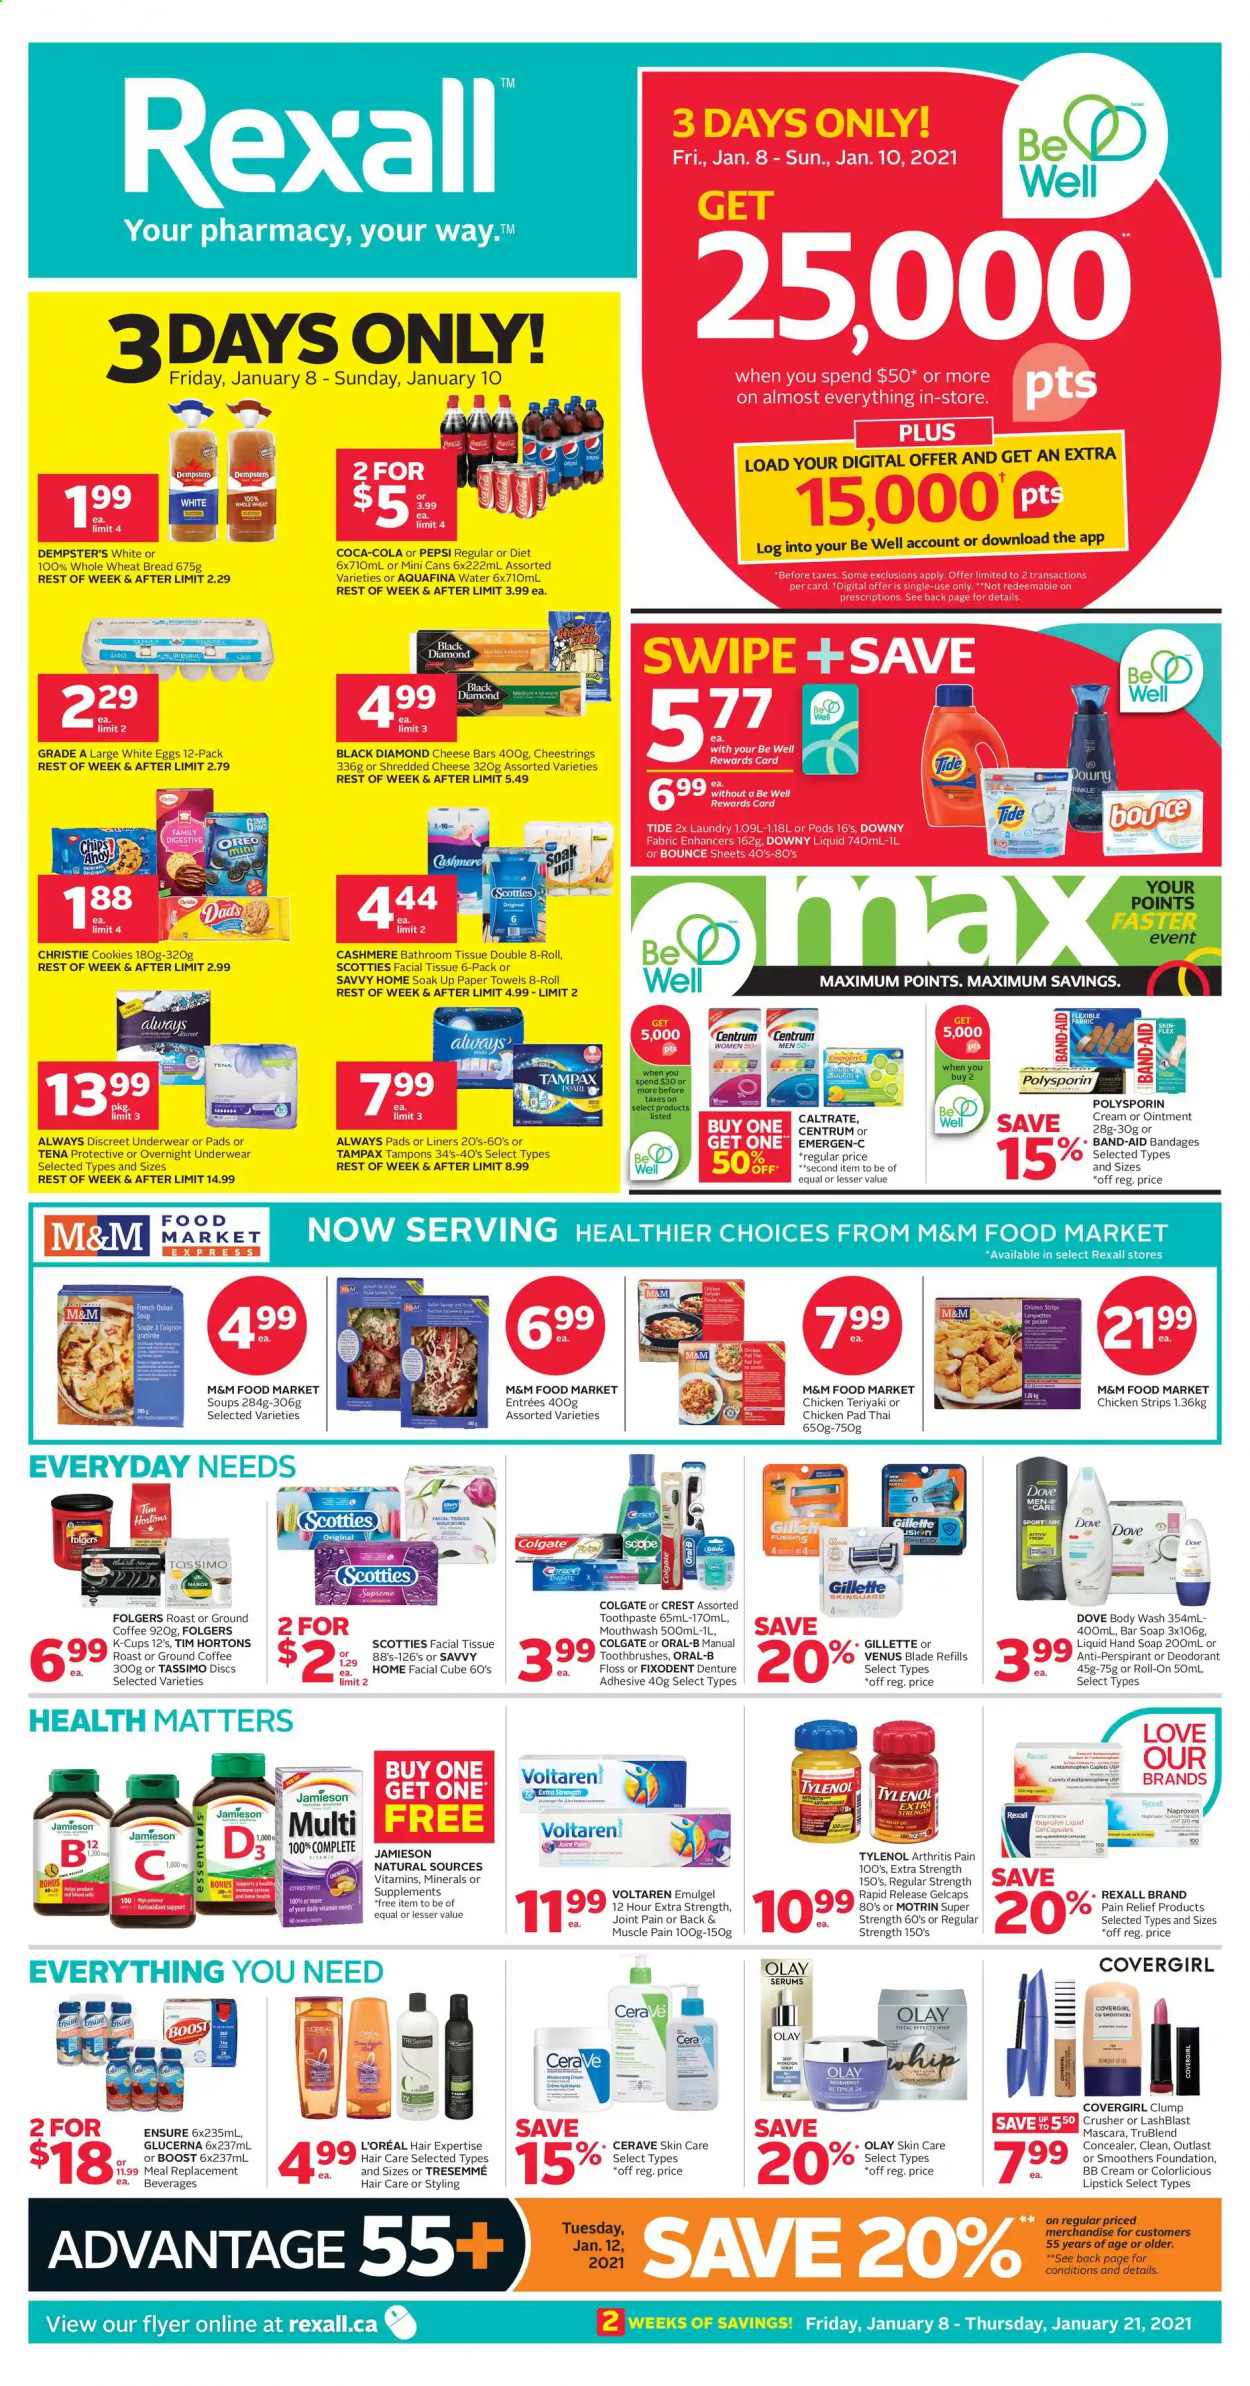 thumbnail - Rexall Flyer - January 08, 2021 - January 21, 2021 - Sales products - cookies, soup, Coca-Cola, Pepsi, Aquafina, Boost, coffee, Folgers, ground coffee, coffee capsules, K-Cups, ointment, bath tissue, kitchen towels, paper towels, Tide, Bounce, Downy Laundry, body wash, hand soap, soap bar, soap, toothpaste, mouthwash, Fixodent, Crest, Always pads, sanitary pads, Always Discreet, tampons, CeraVe, facial tissues, L’Oréal, serum, Olay, TRESemmé, anti-perspirant, roll-on, Venus, corrector, lipstick, pain relief, Tylenol, Ibuprofen, Glucerna, Emergen-C, Centrum, Motrin, Oreo, Gillette, mascara, Tampax, Oral-B, M&M's, deodorant. Page 1.